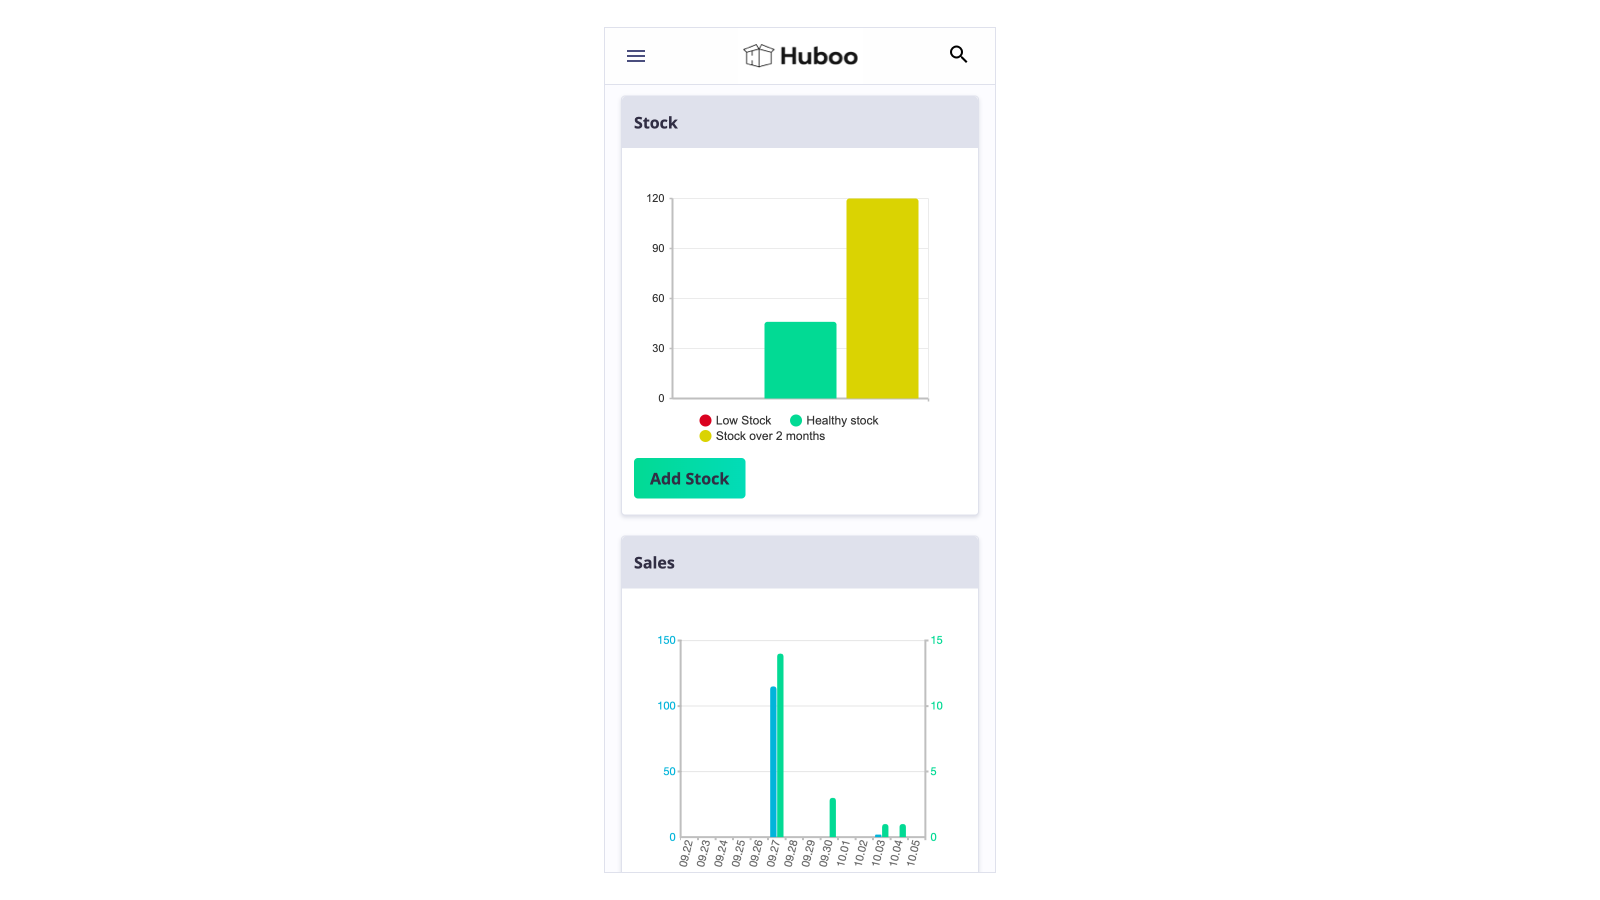 A view of the Huboo customer dashboard screen on a mobile device